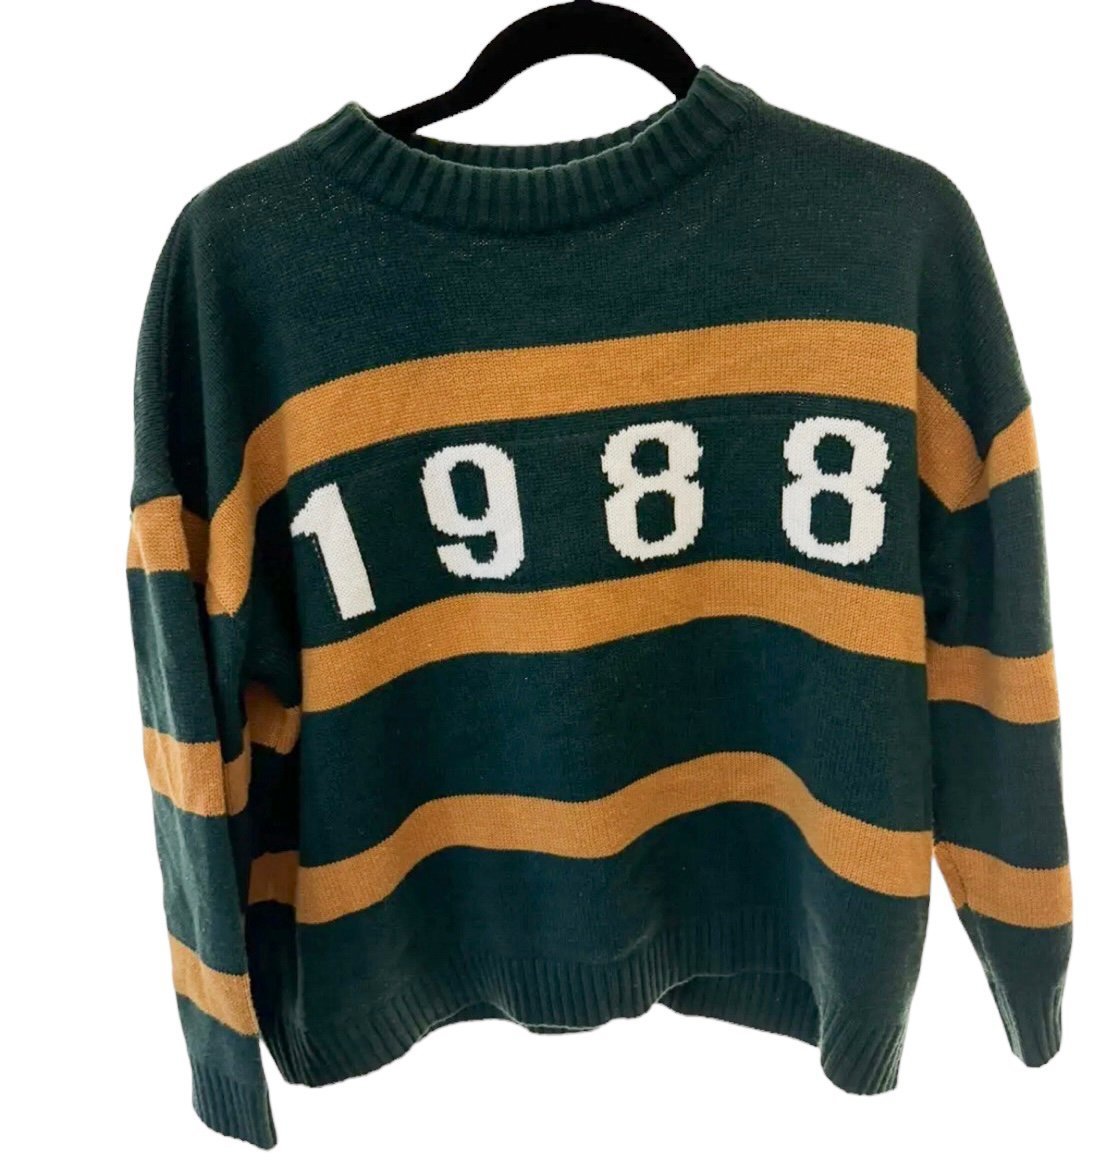 1988 Vintage Style Sweater Green And Yellow Small 5pIRo